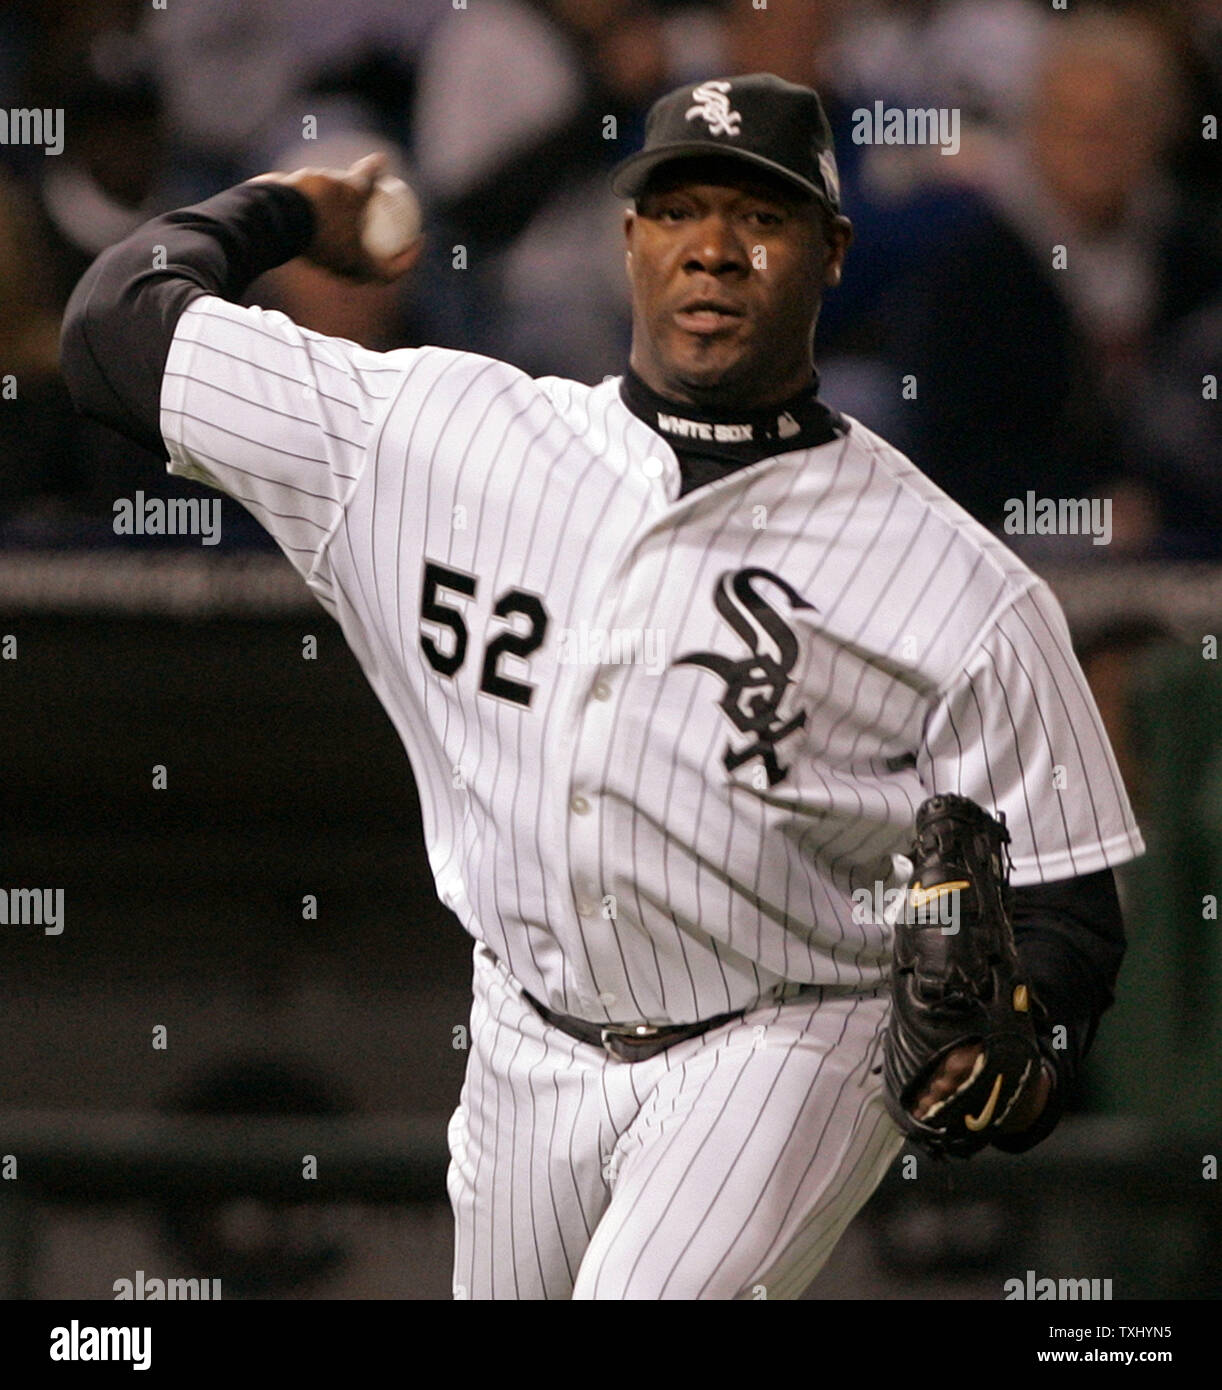 Chicago White Sox starting pitcher Jose Contreras (52) throws out